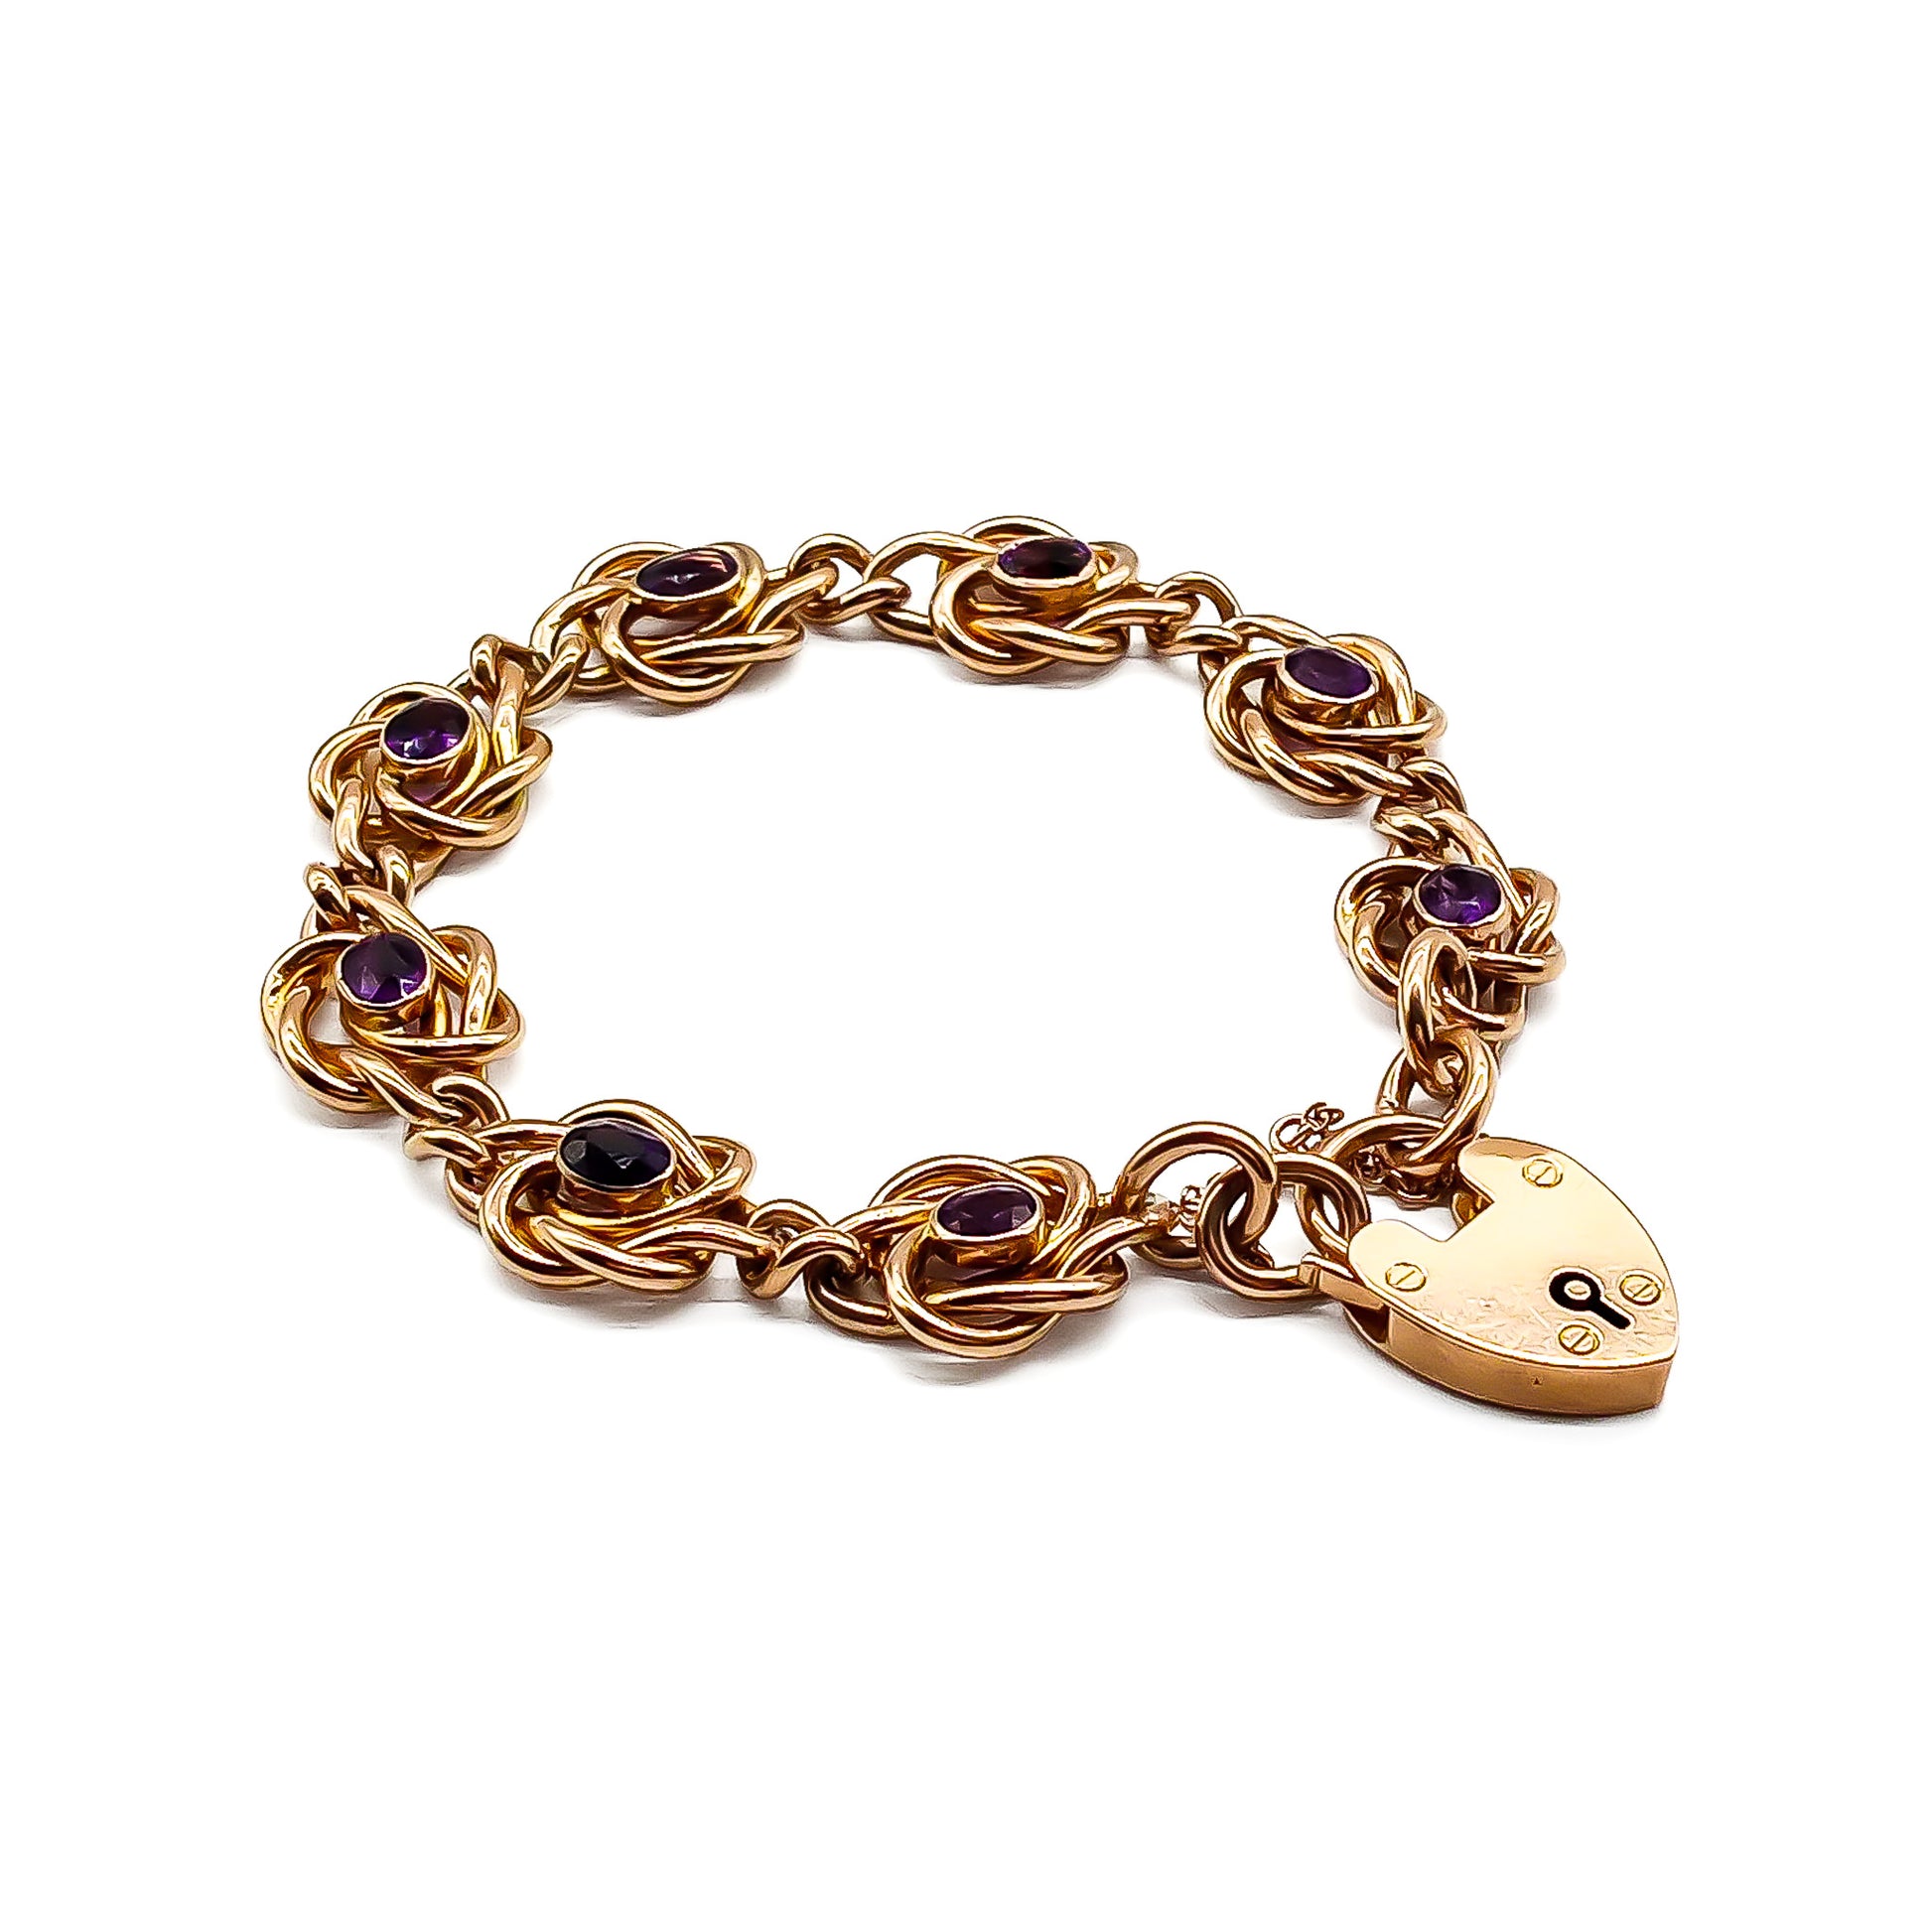 Stunning Edwardian rose gold bracelet set with eight faceted dark purple amethysts, with a padlock and safety chain. Birmingham 1908